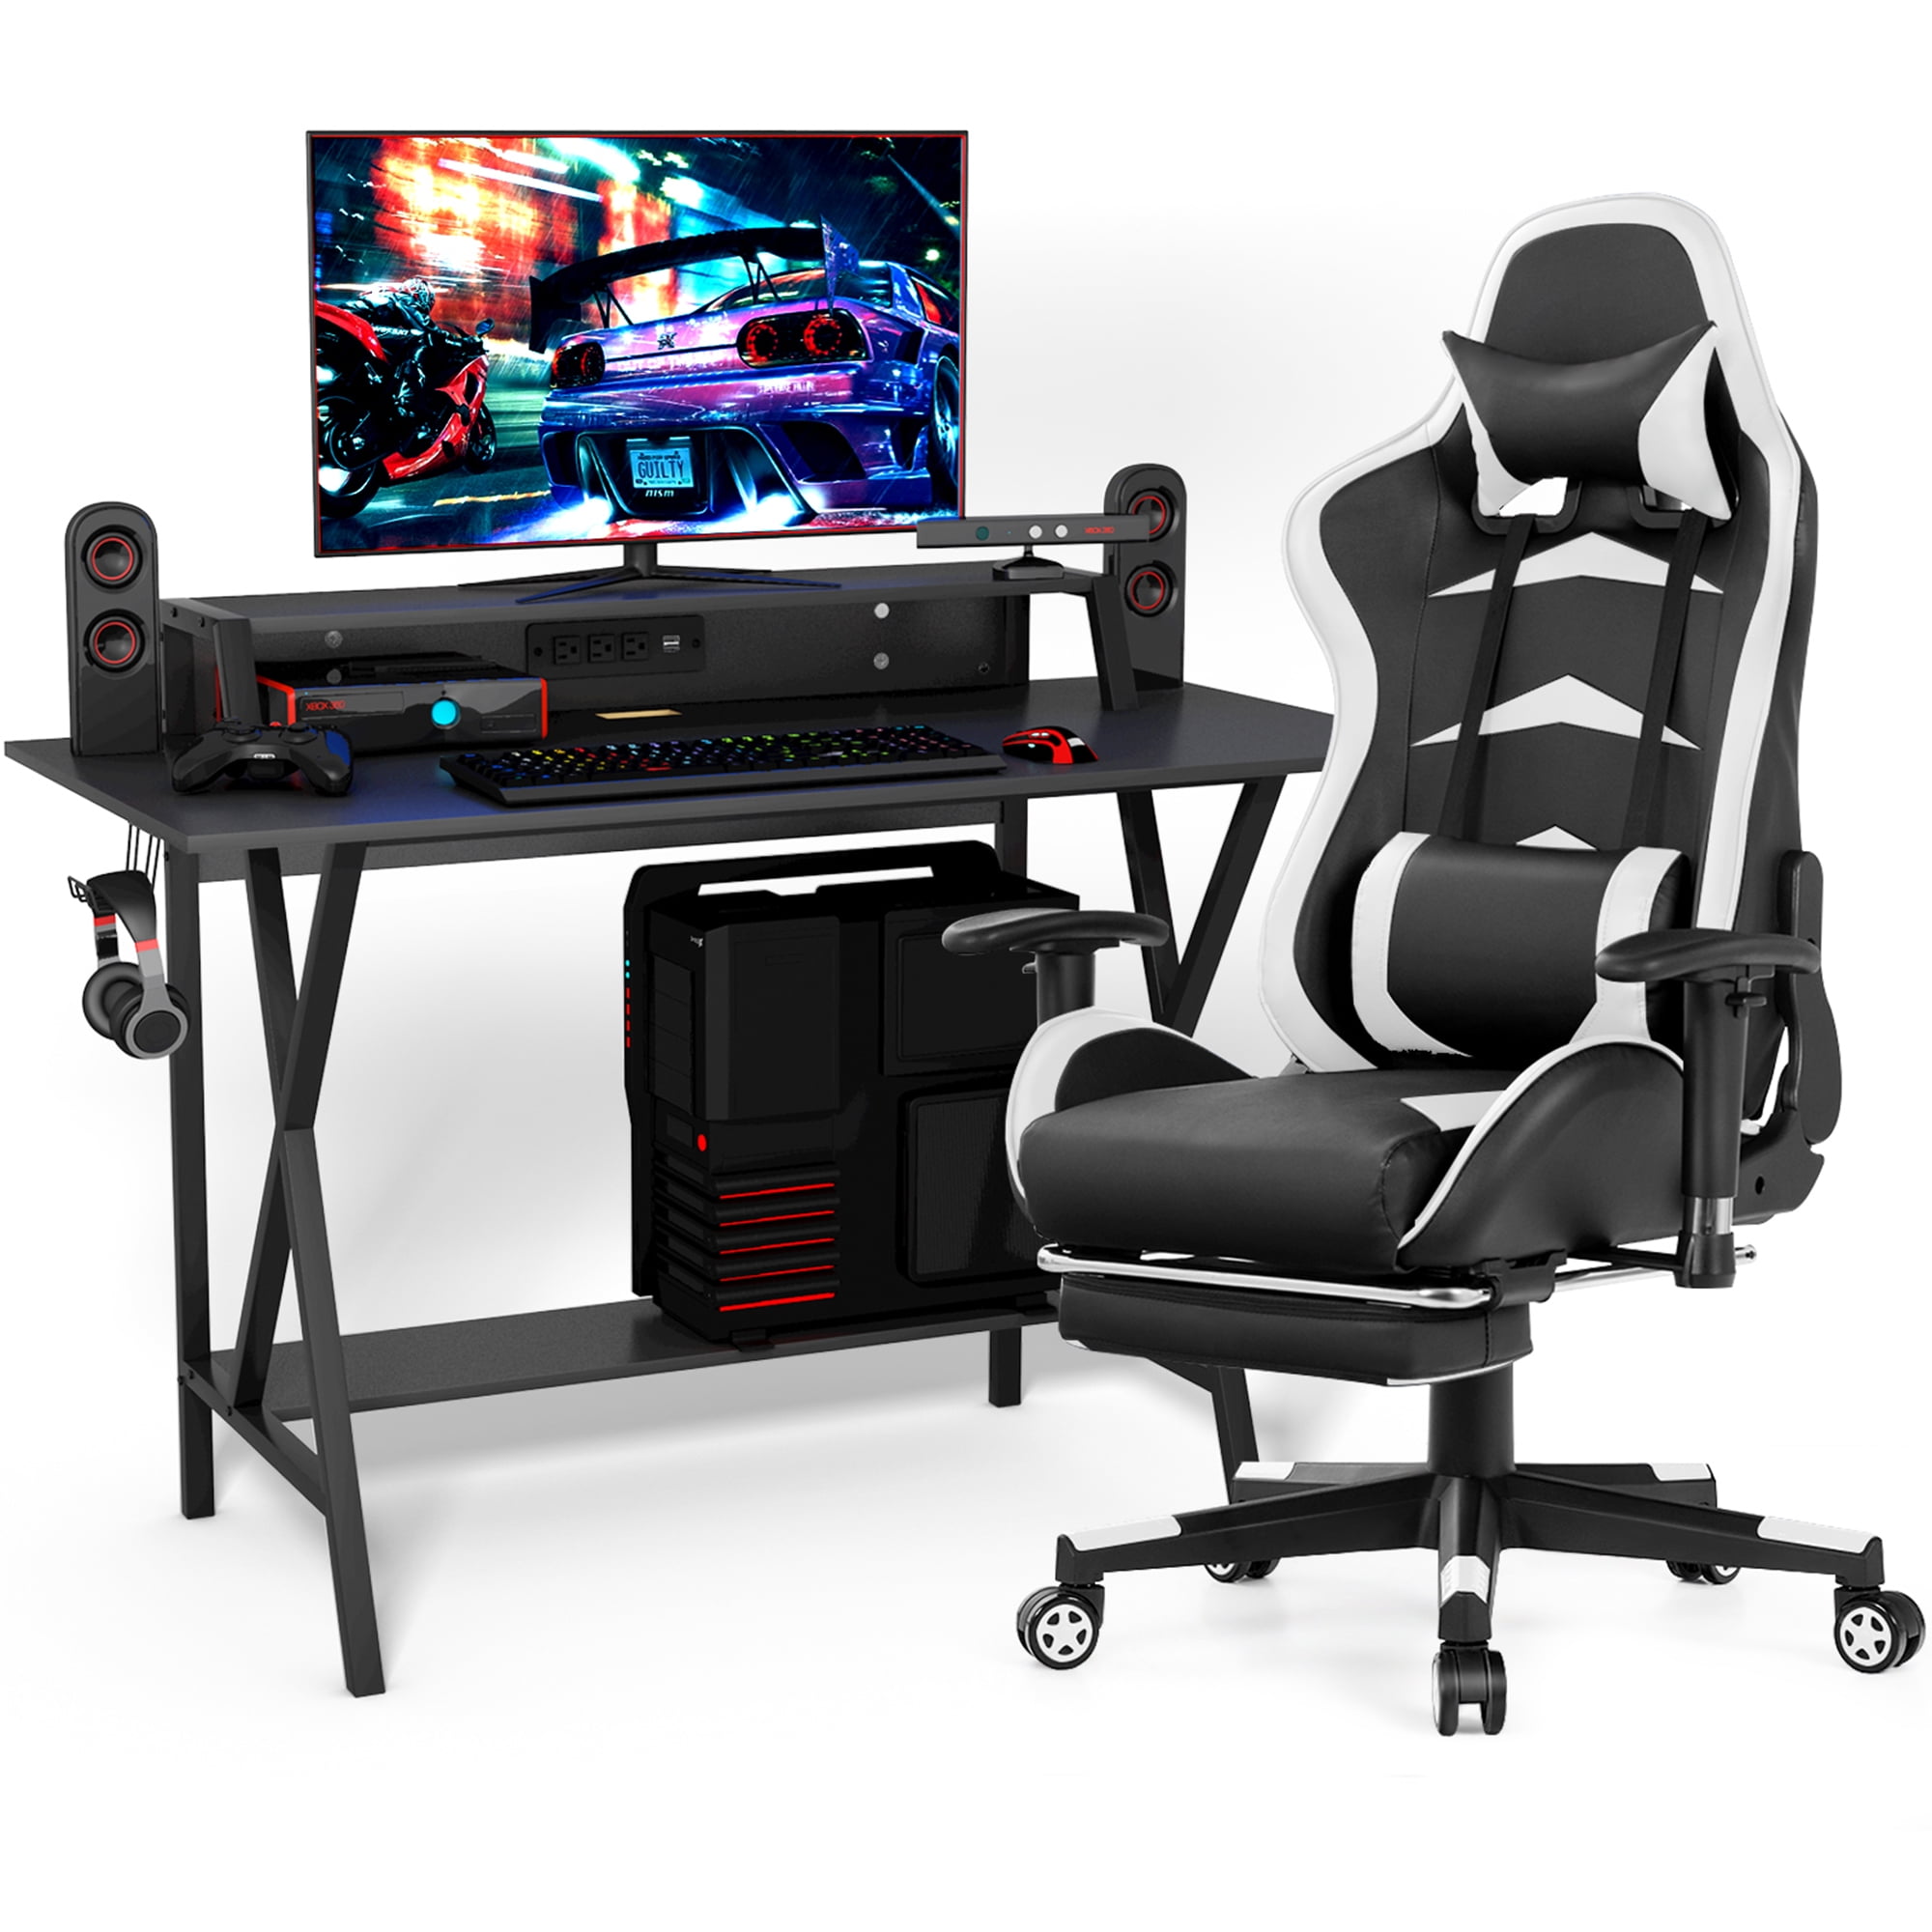 Creatice Gaming Chair Black Friday Canada for Small Space